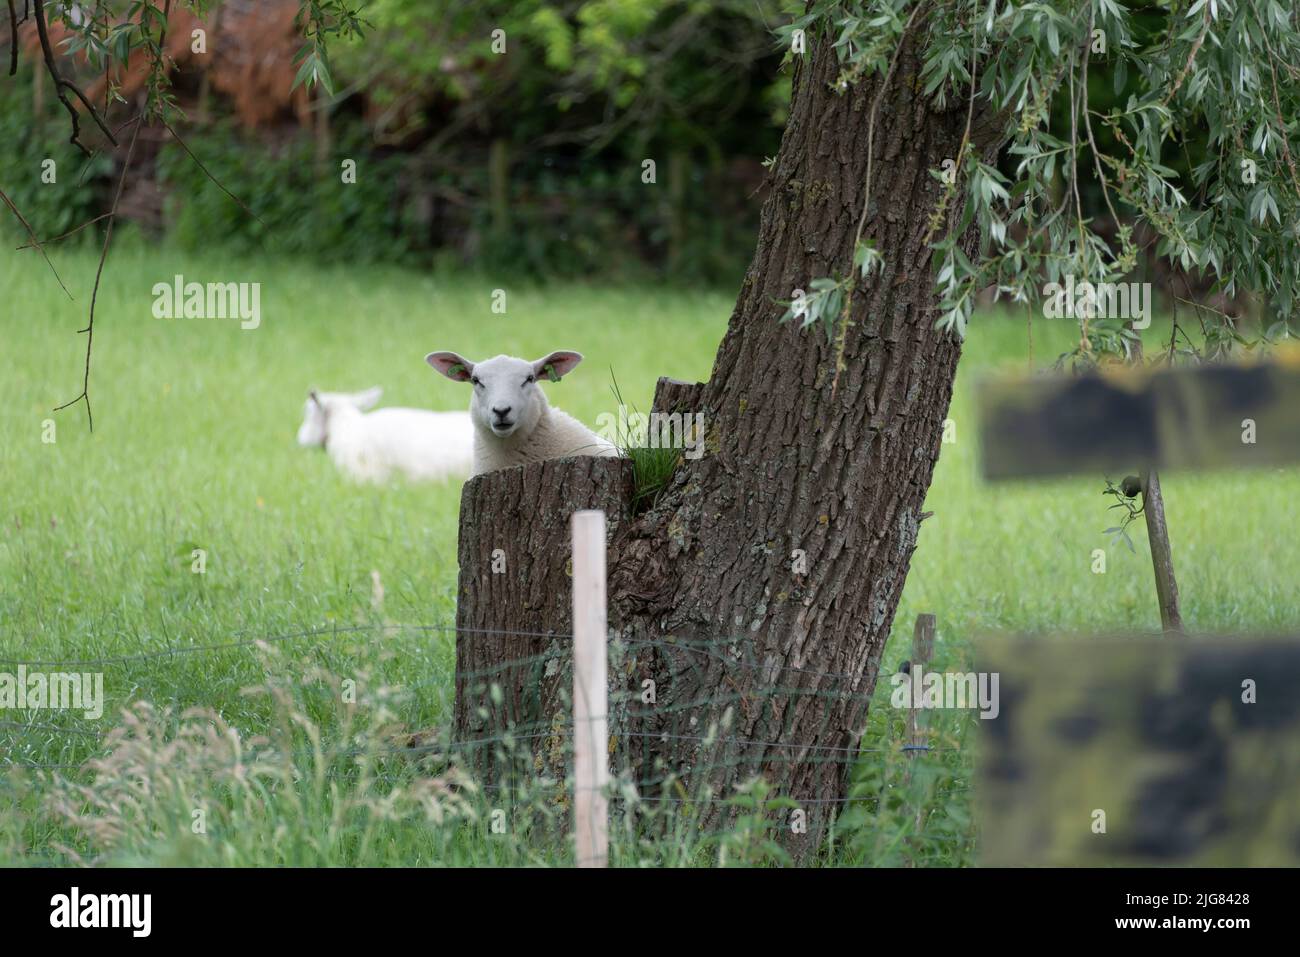 A sheep curiously peers out from behind a tree trunk. Stock Photo